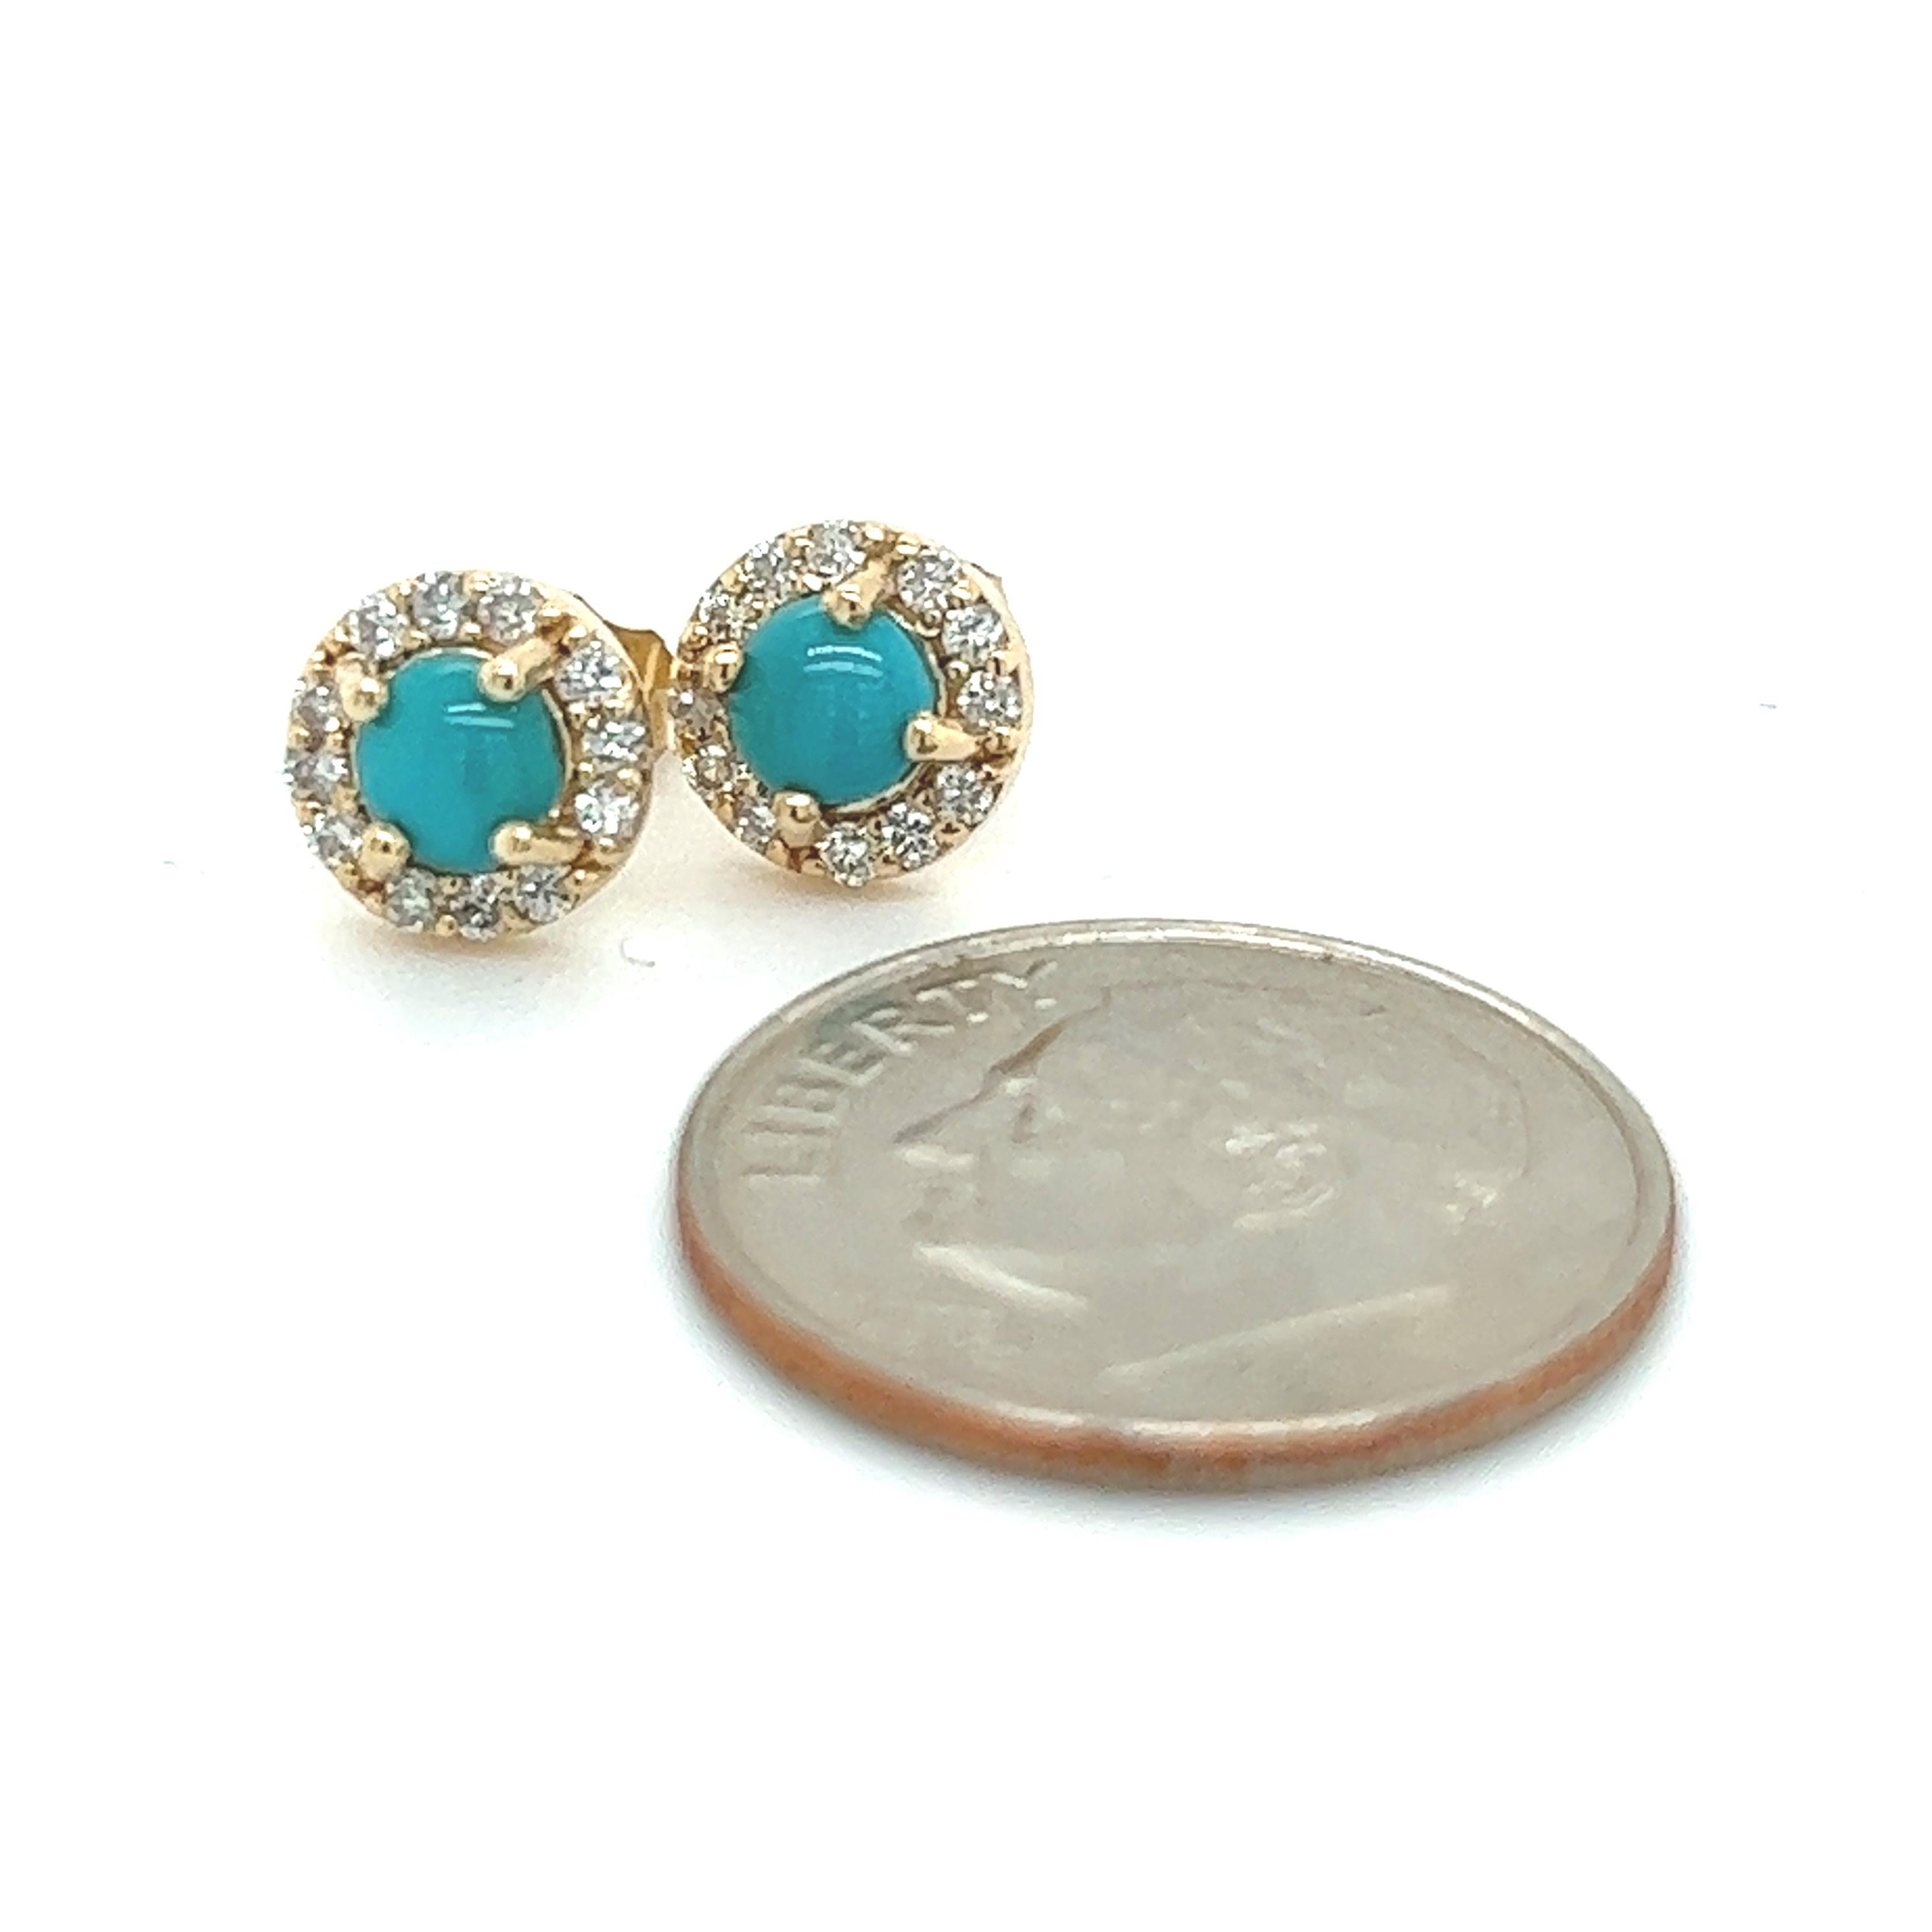 Round Cut Natural Turquoise Diamond Stud Earrings 14k Yellow Gold 0.65 TCW Certified For Sale